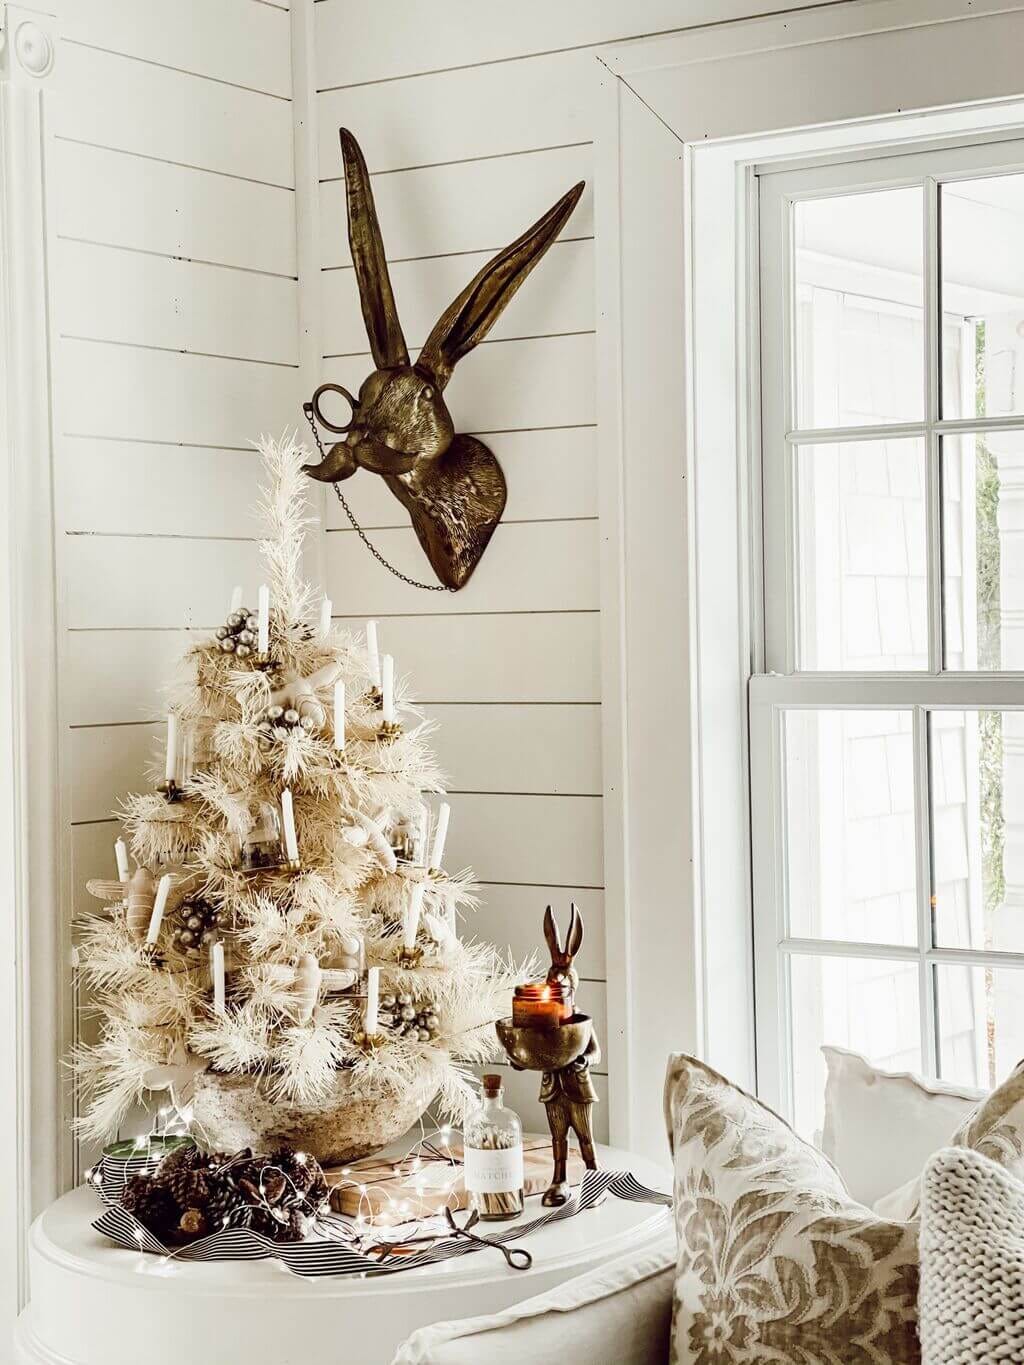 30 Best White Christmas Tree Ideas of 2022 to Help You Decorate